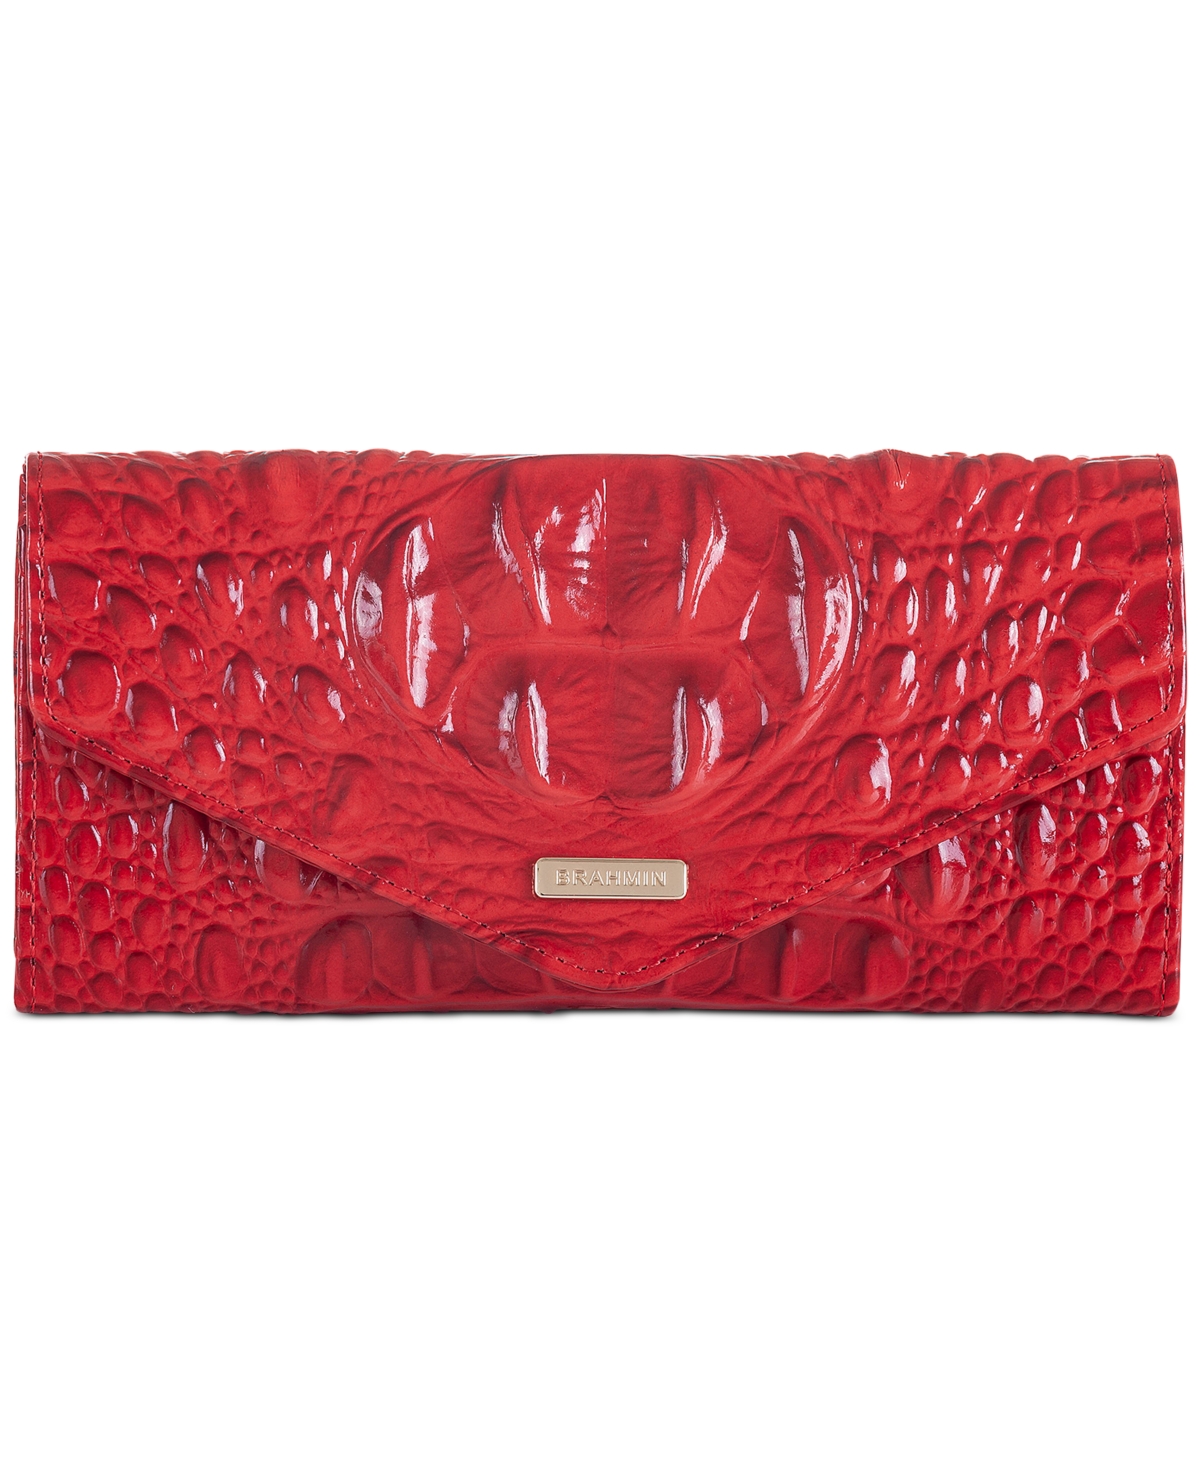 Veronica Melbourne Embossed Leather Wallet - Carnation/Gold, Created for Macy's